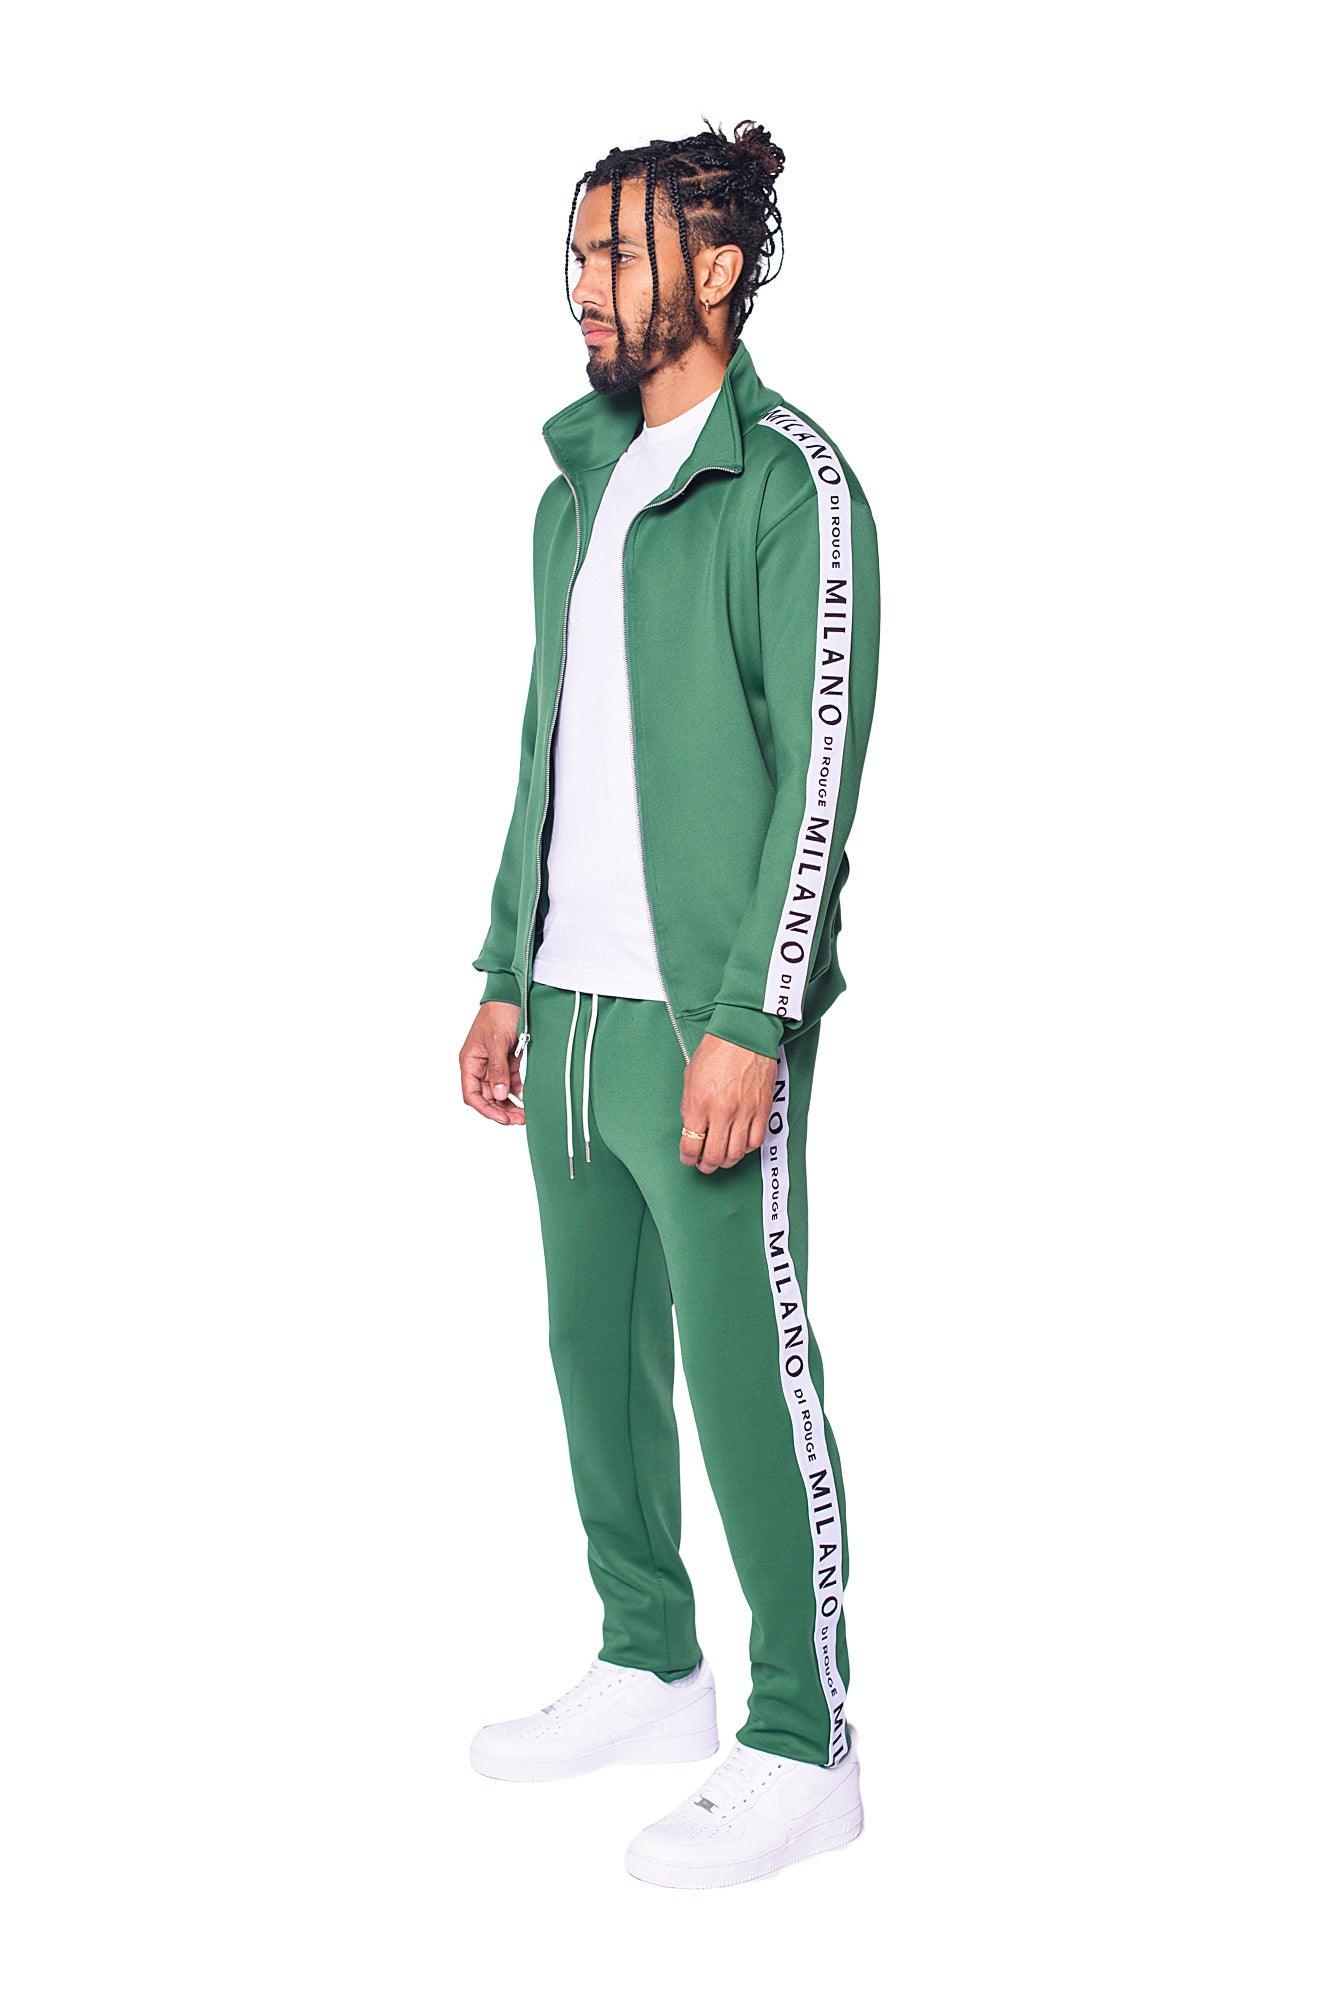 Milano Di Rouge Tracksuit Mens Shop Clothing Shoes Online milano di rouge tracksuit mens